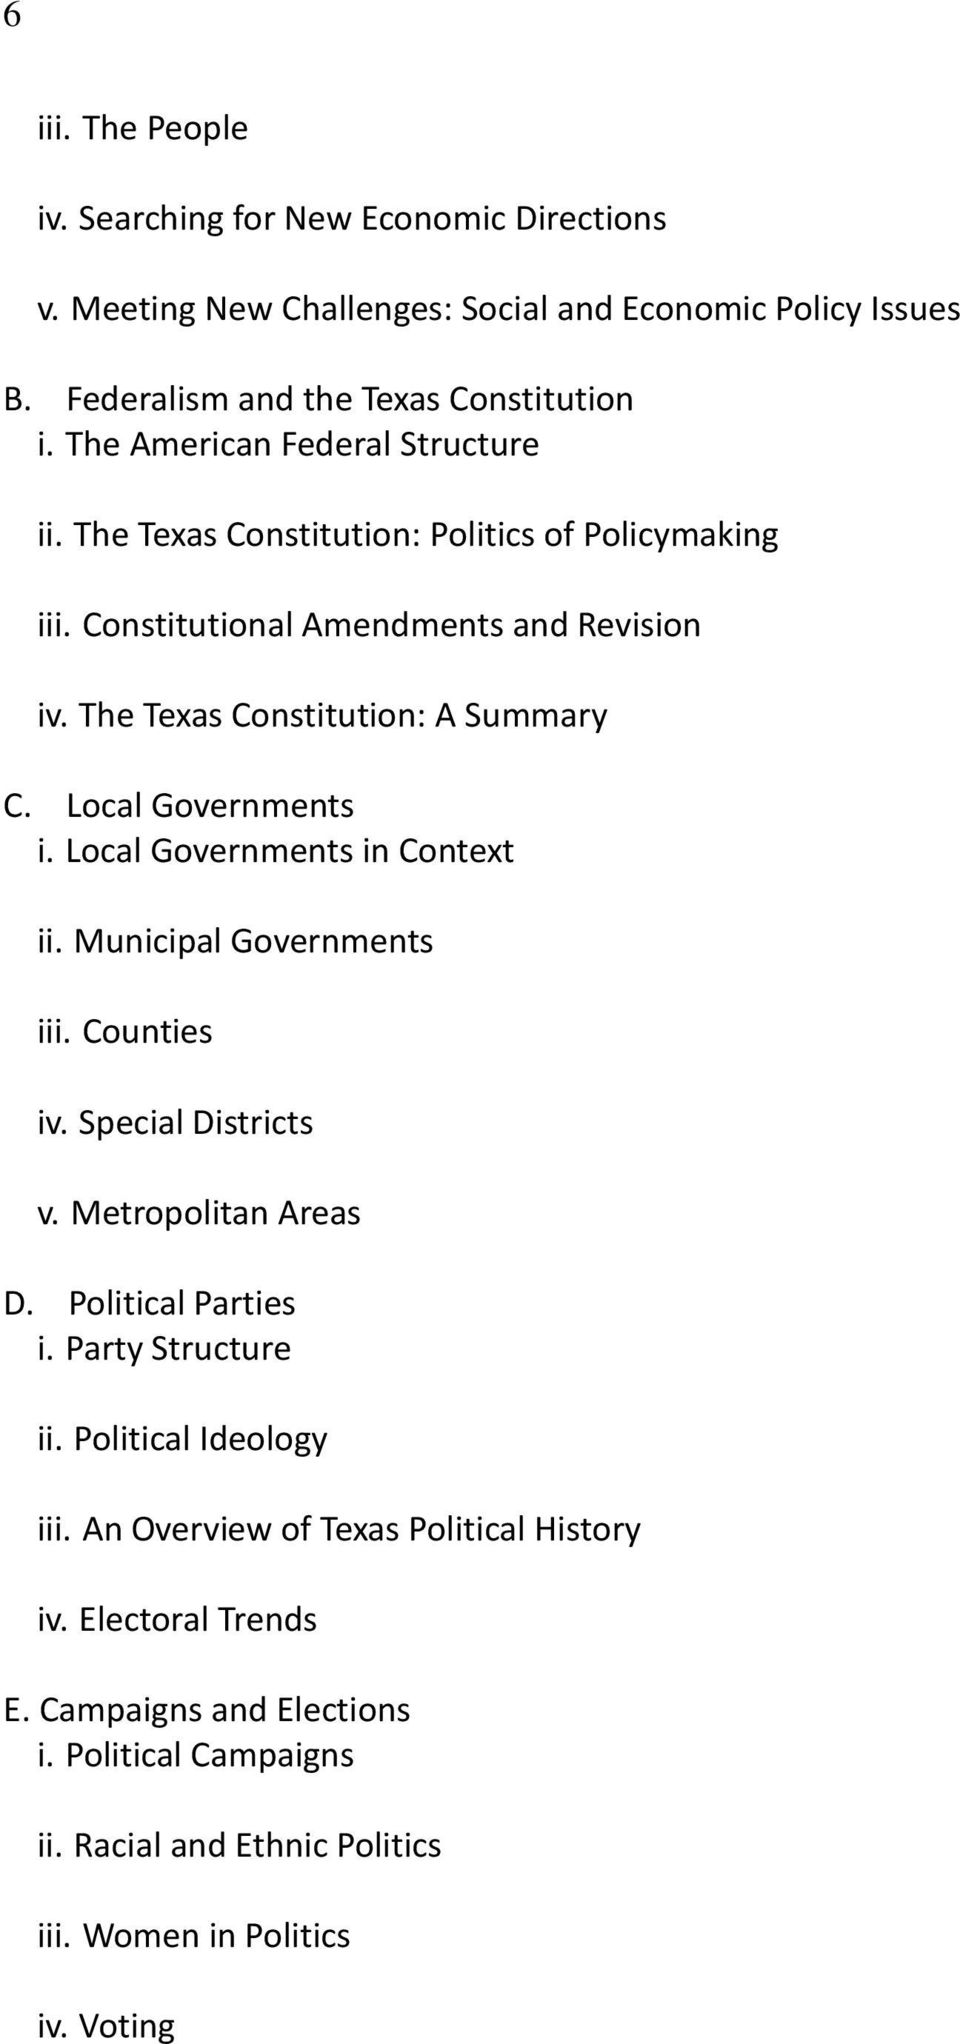 Local Governments i. Local Governments in Context ii. Municipal Governments iii. Counties iv. Special Districts v. Metropolitan Areas D. Political Parties i. Party Structure ii.